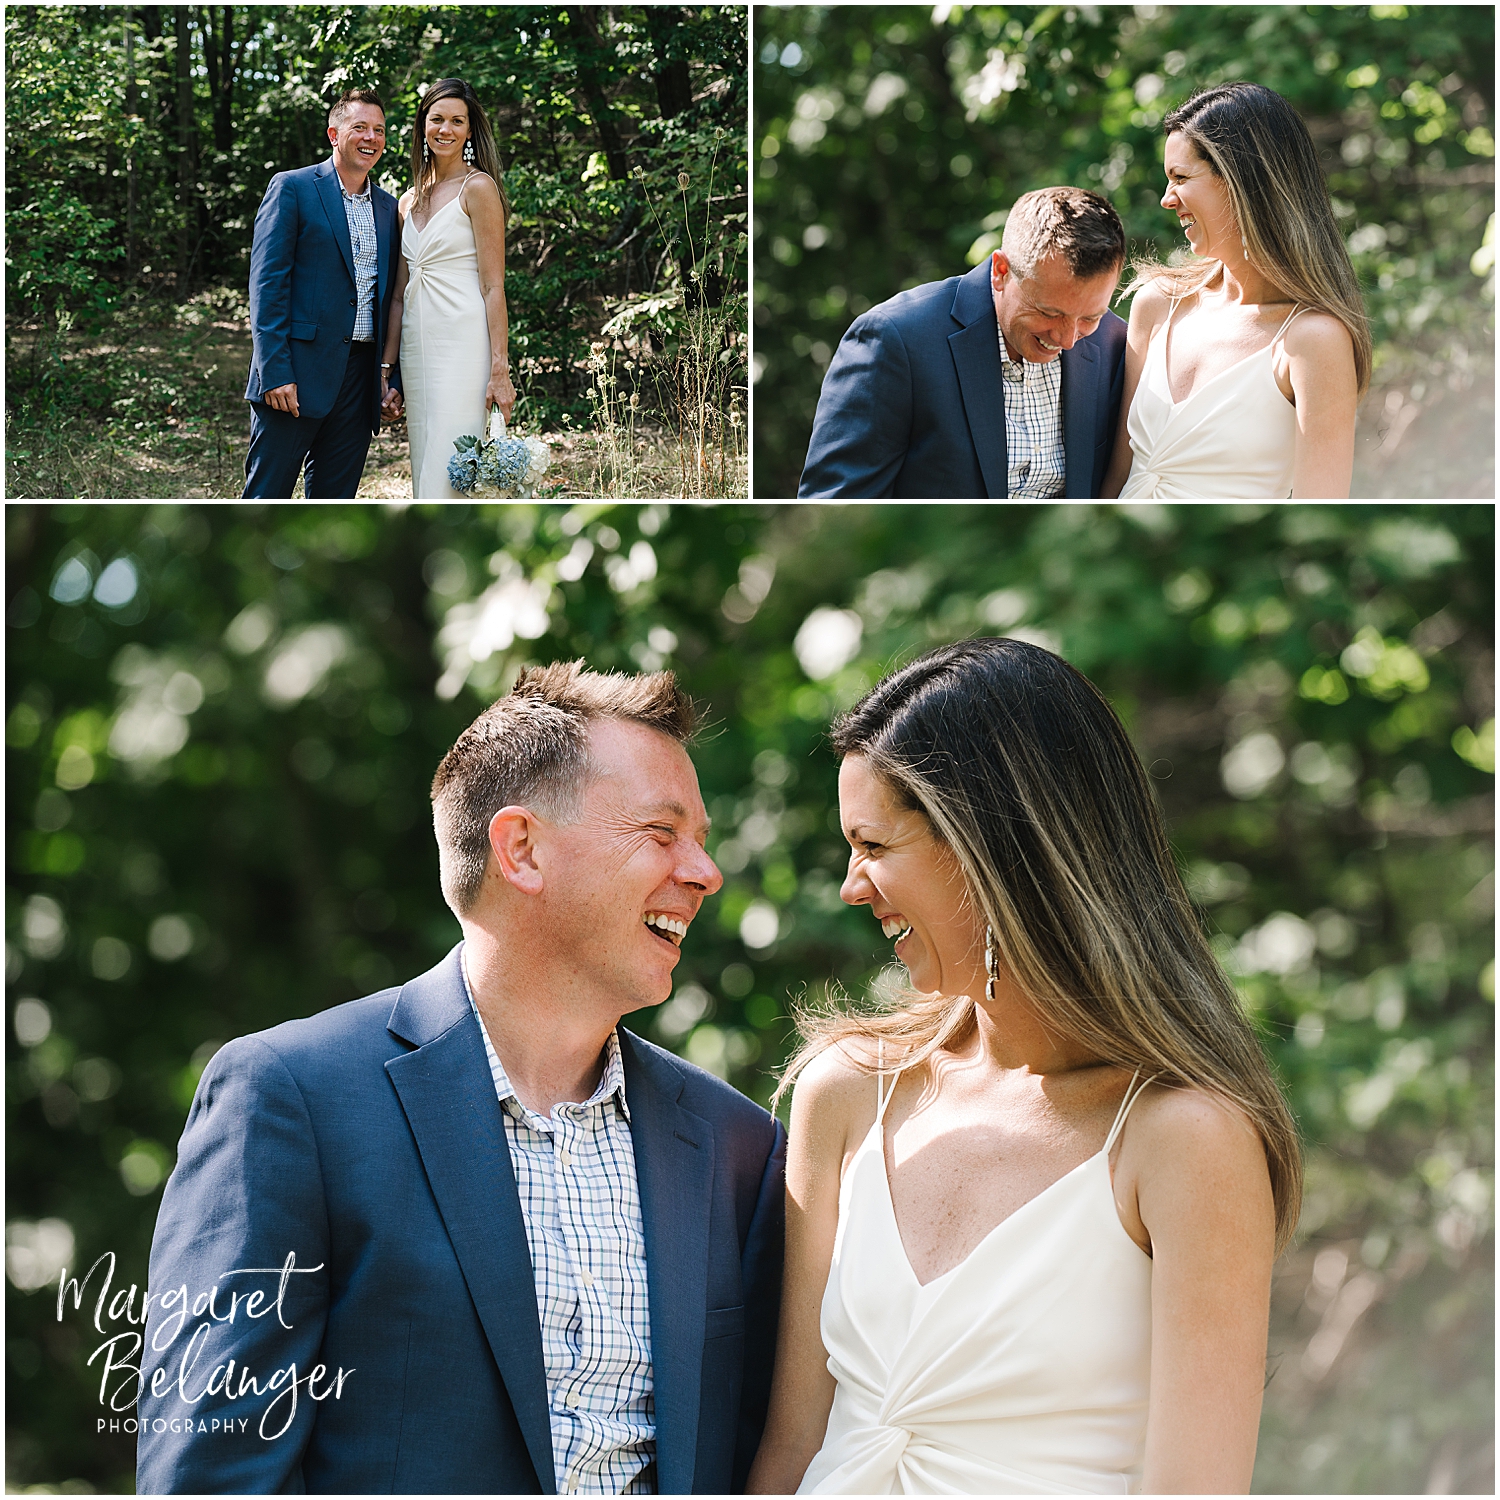 A collage of three photos showing a smiling wedding couple in formal wear, embracing and enjoying a sunny day outdoors.